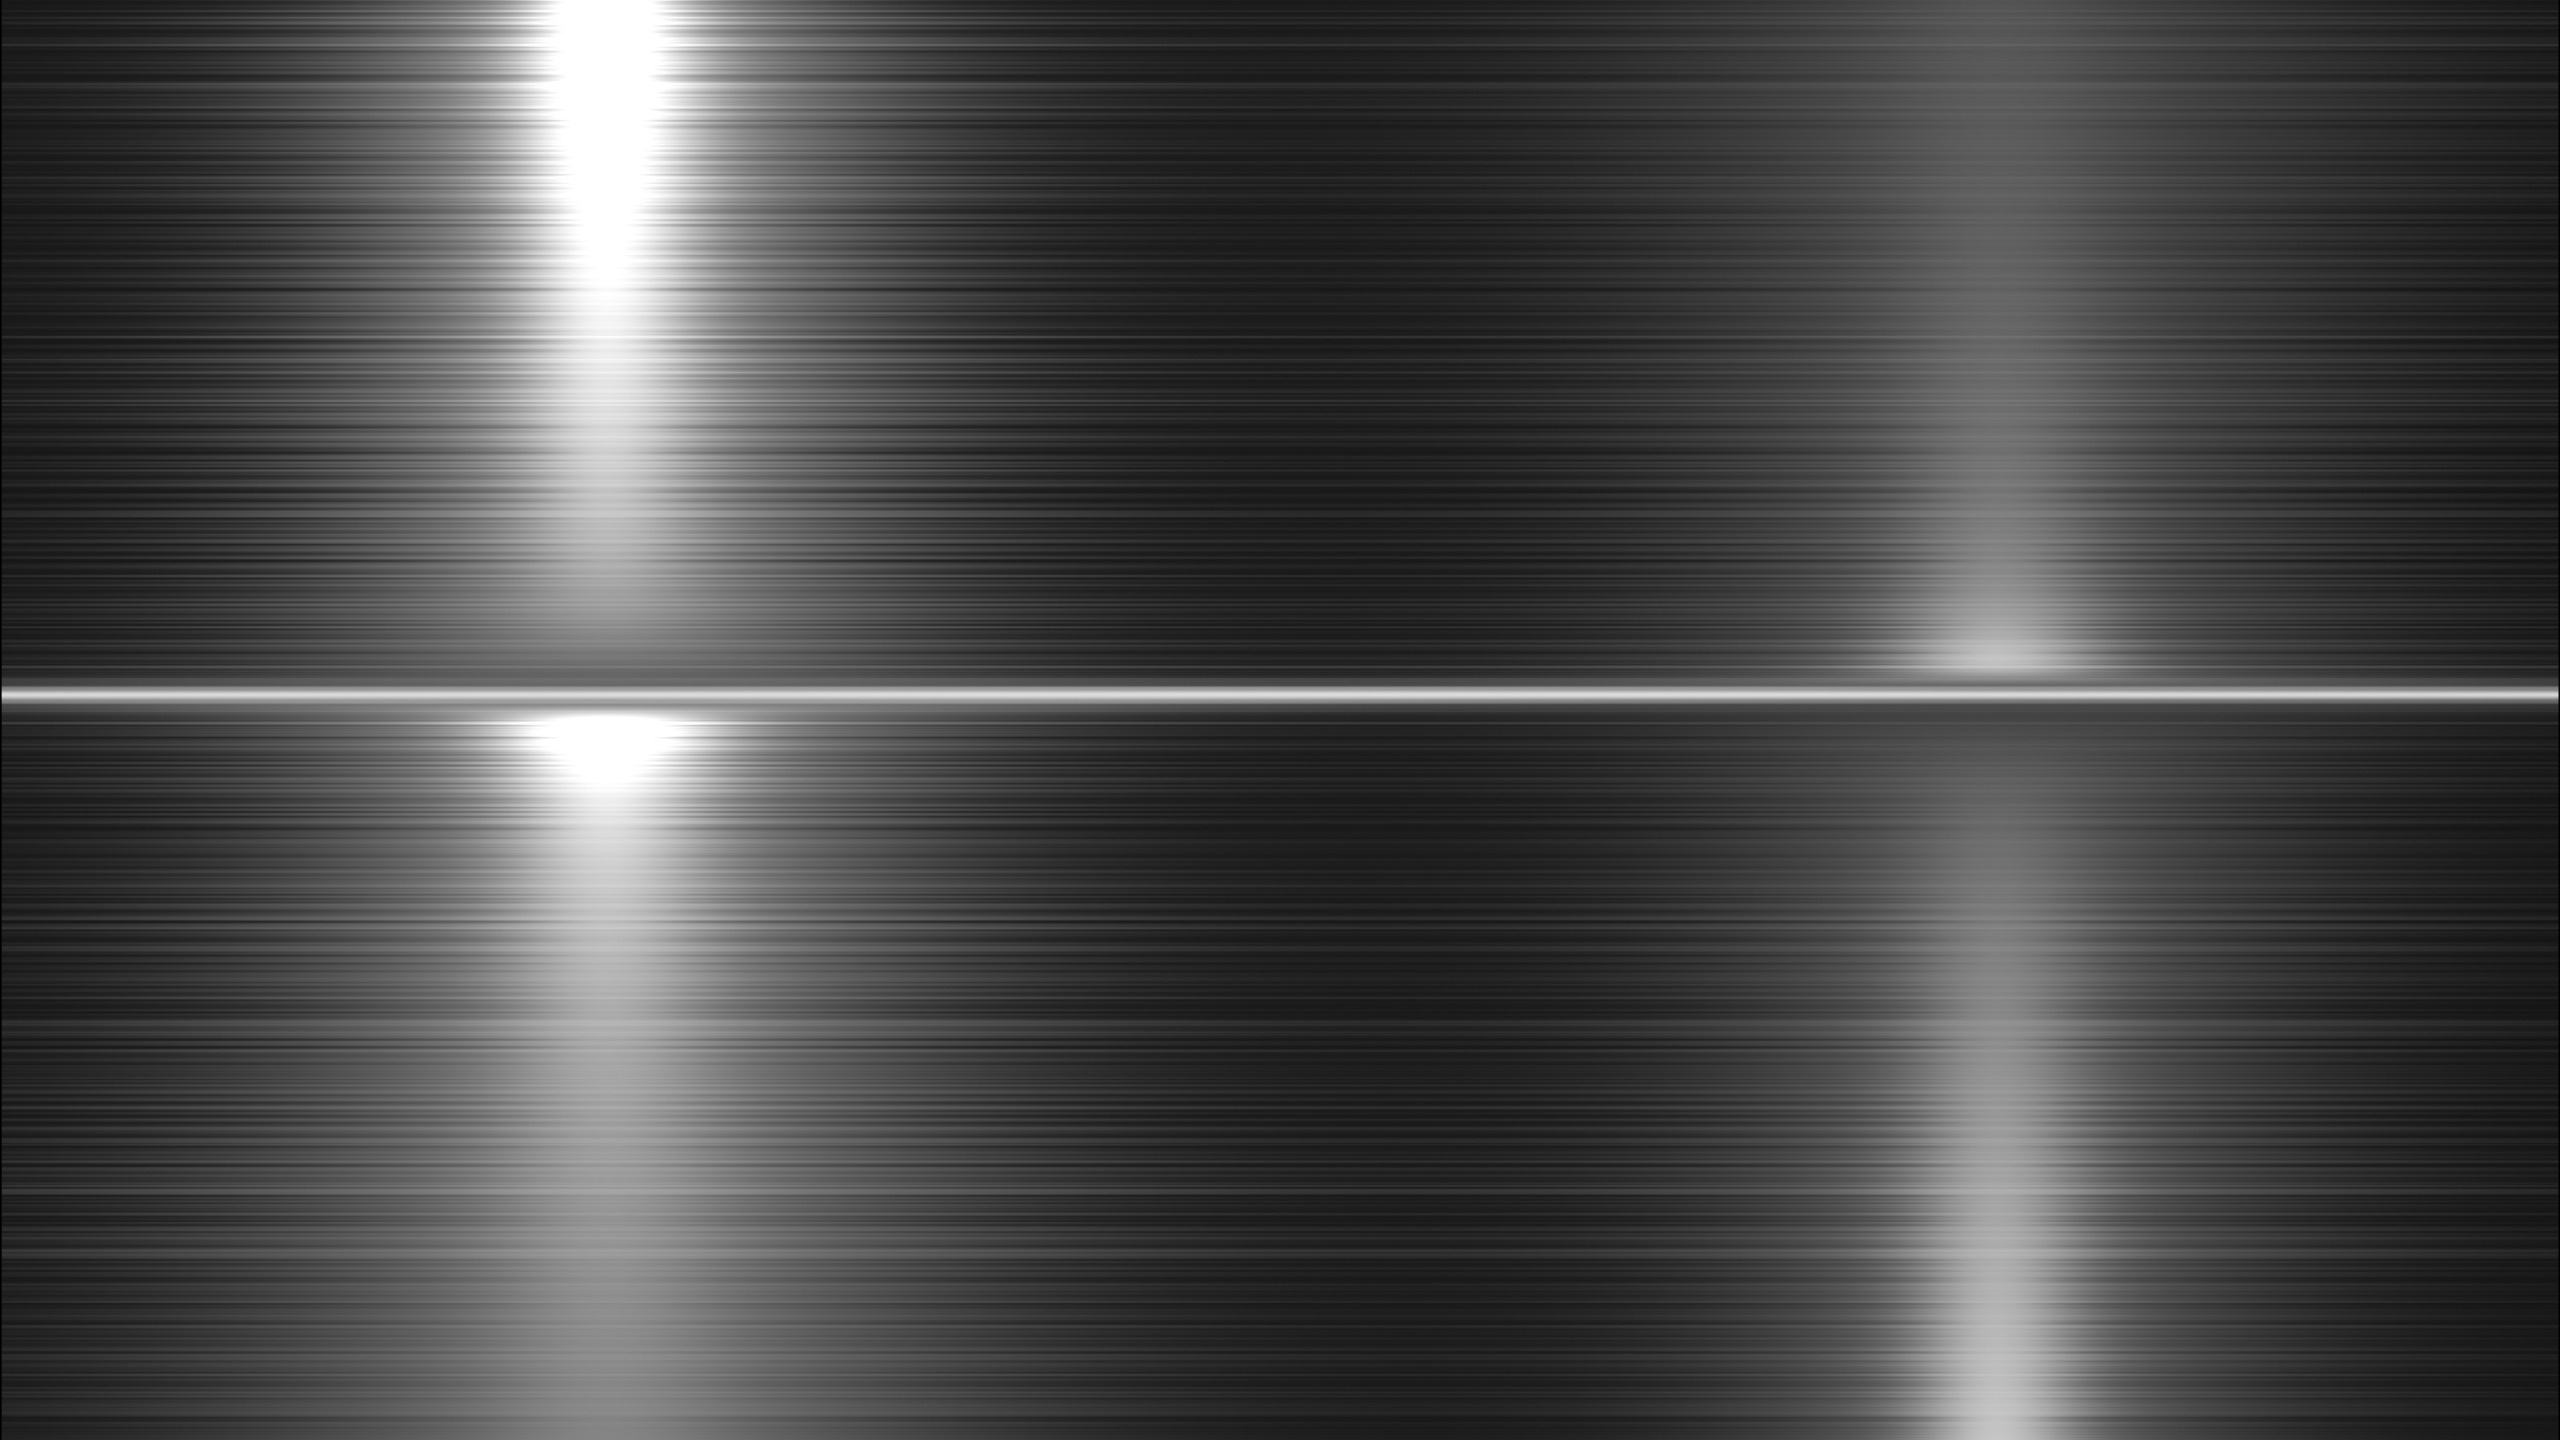 White and Black Striped Textile. Wallpaper in 2560x1440 Resolution